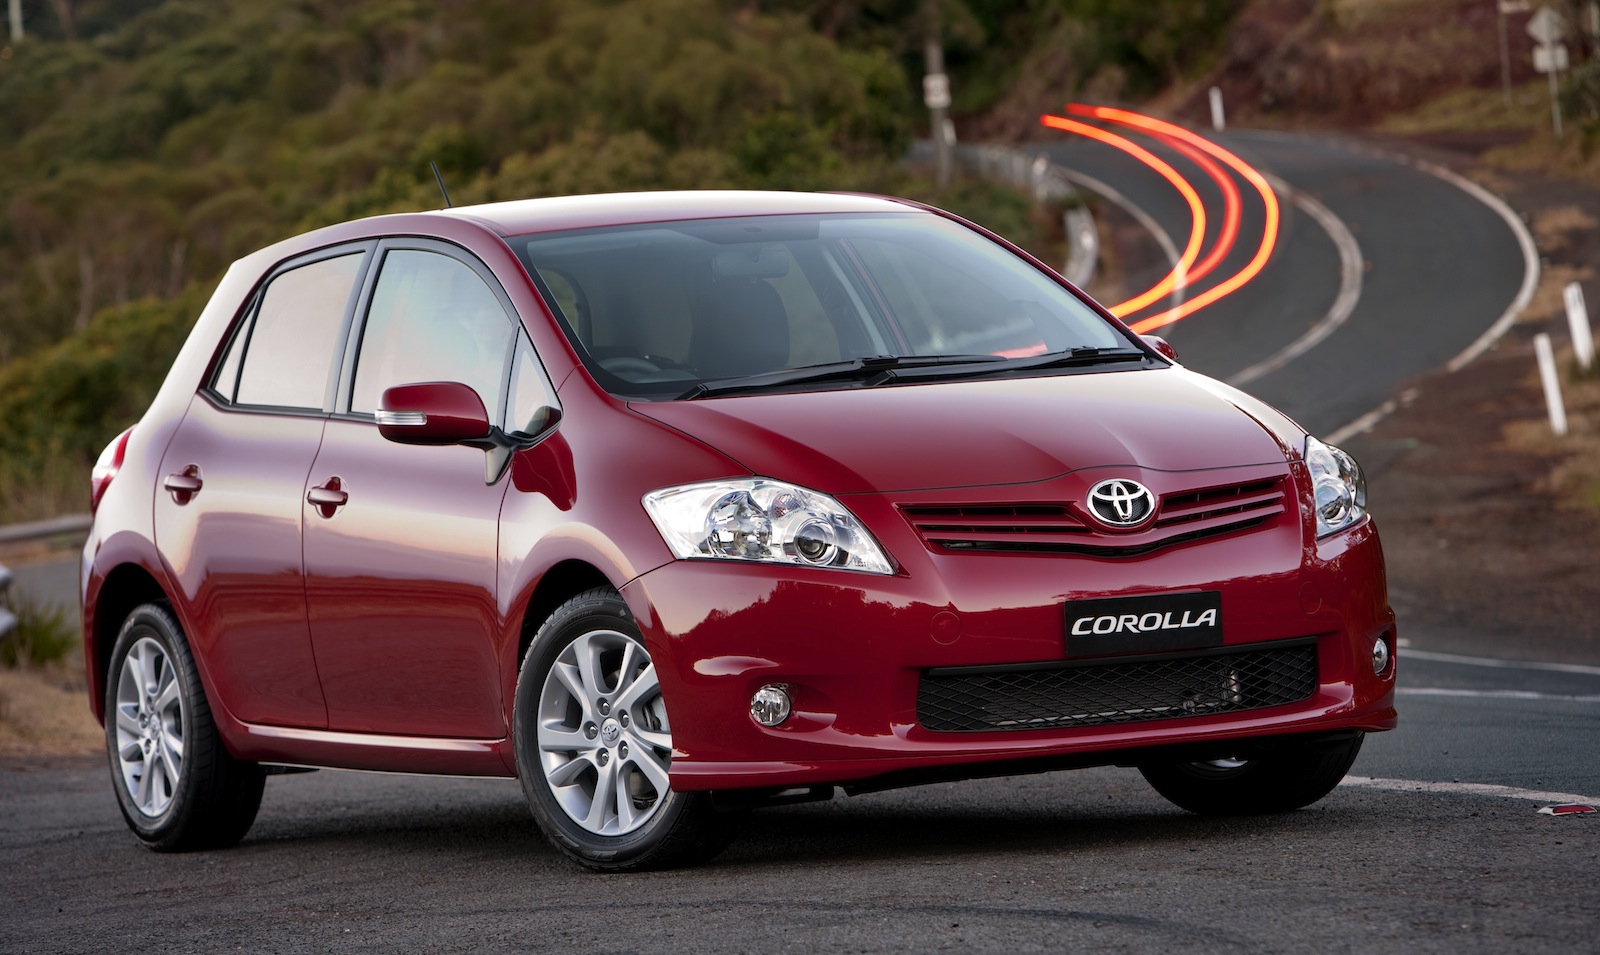 Ford Focus, Toyota Corolla battle over world's topselling